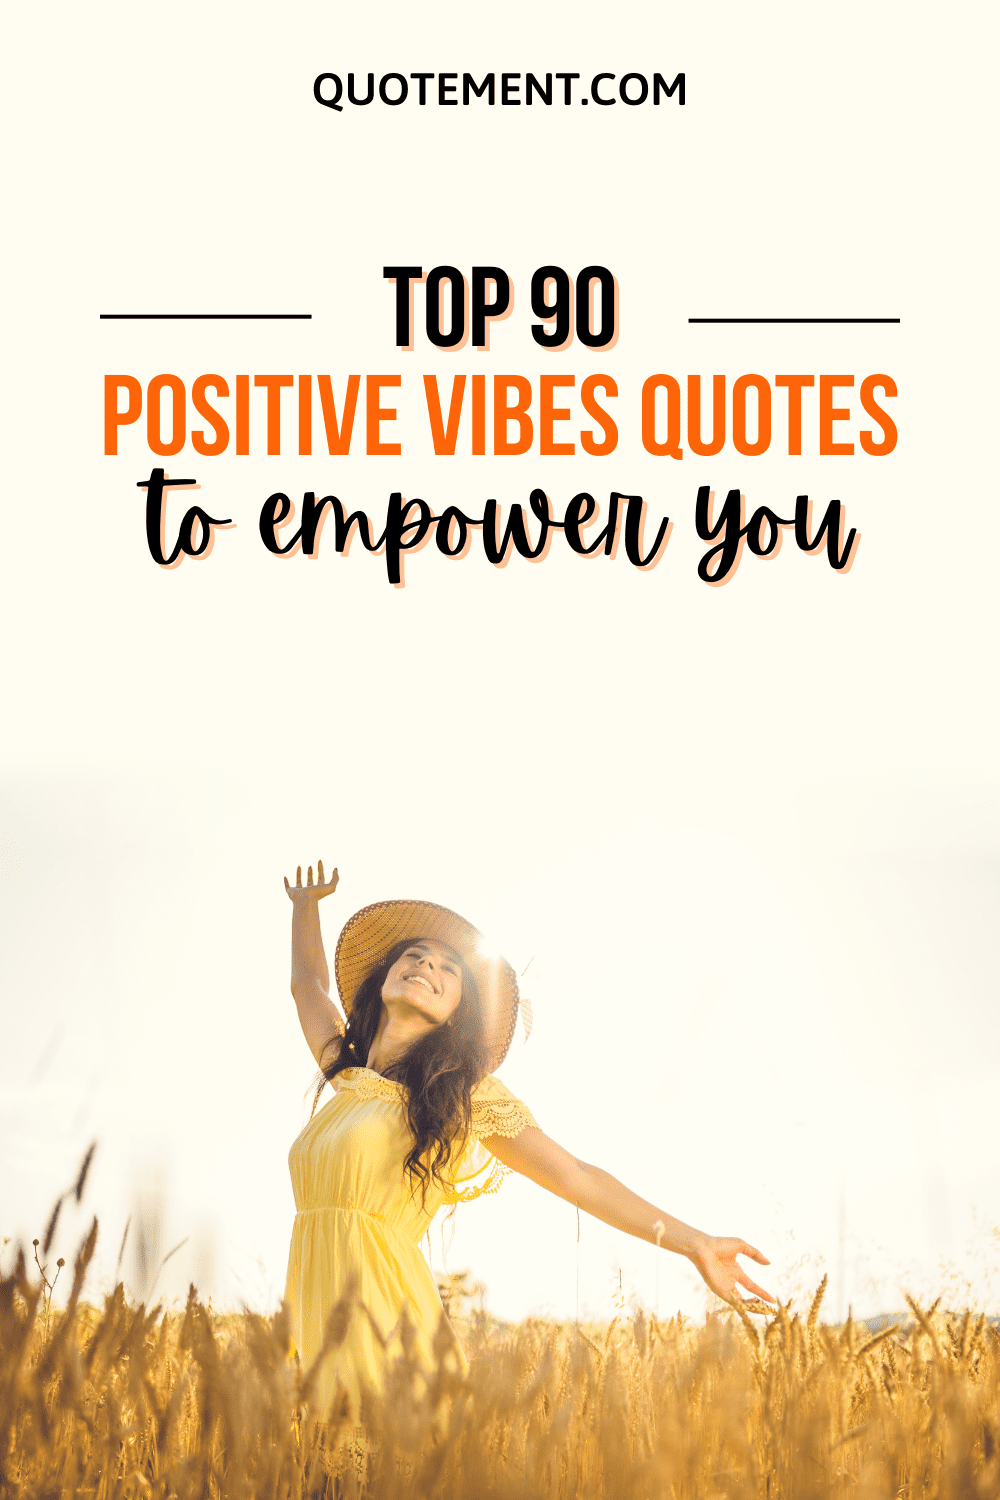 Top 90 Positive Vibes Quotes To Empower You Every Day Pinterest